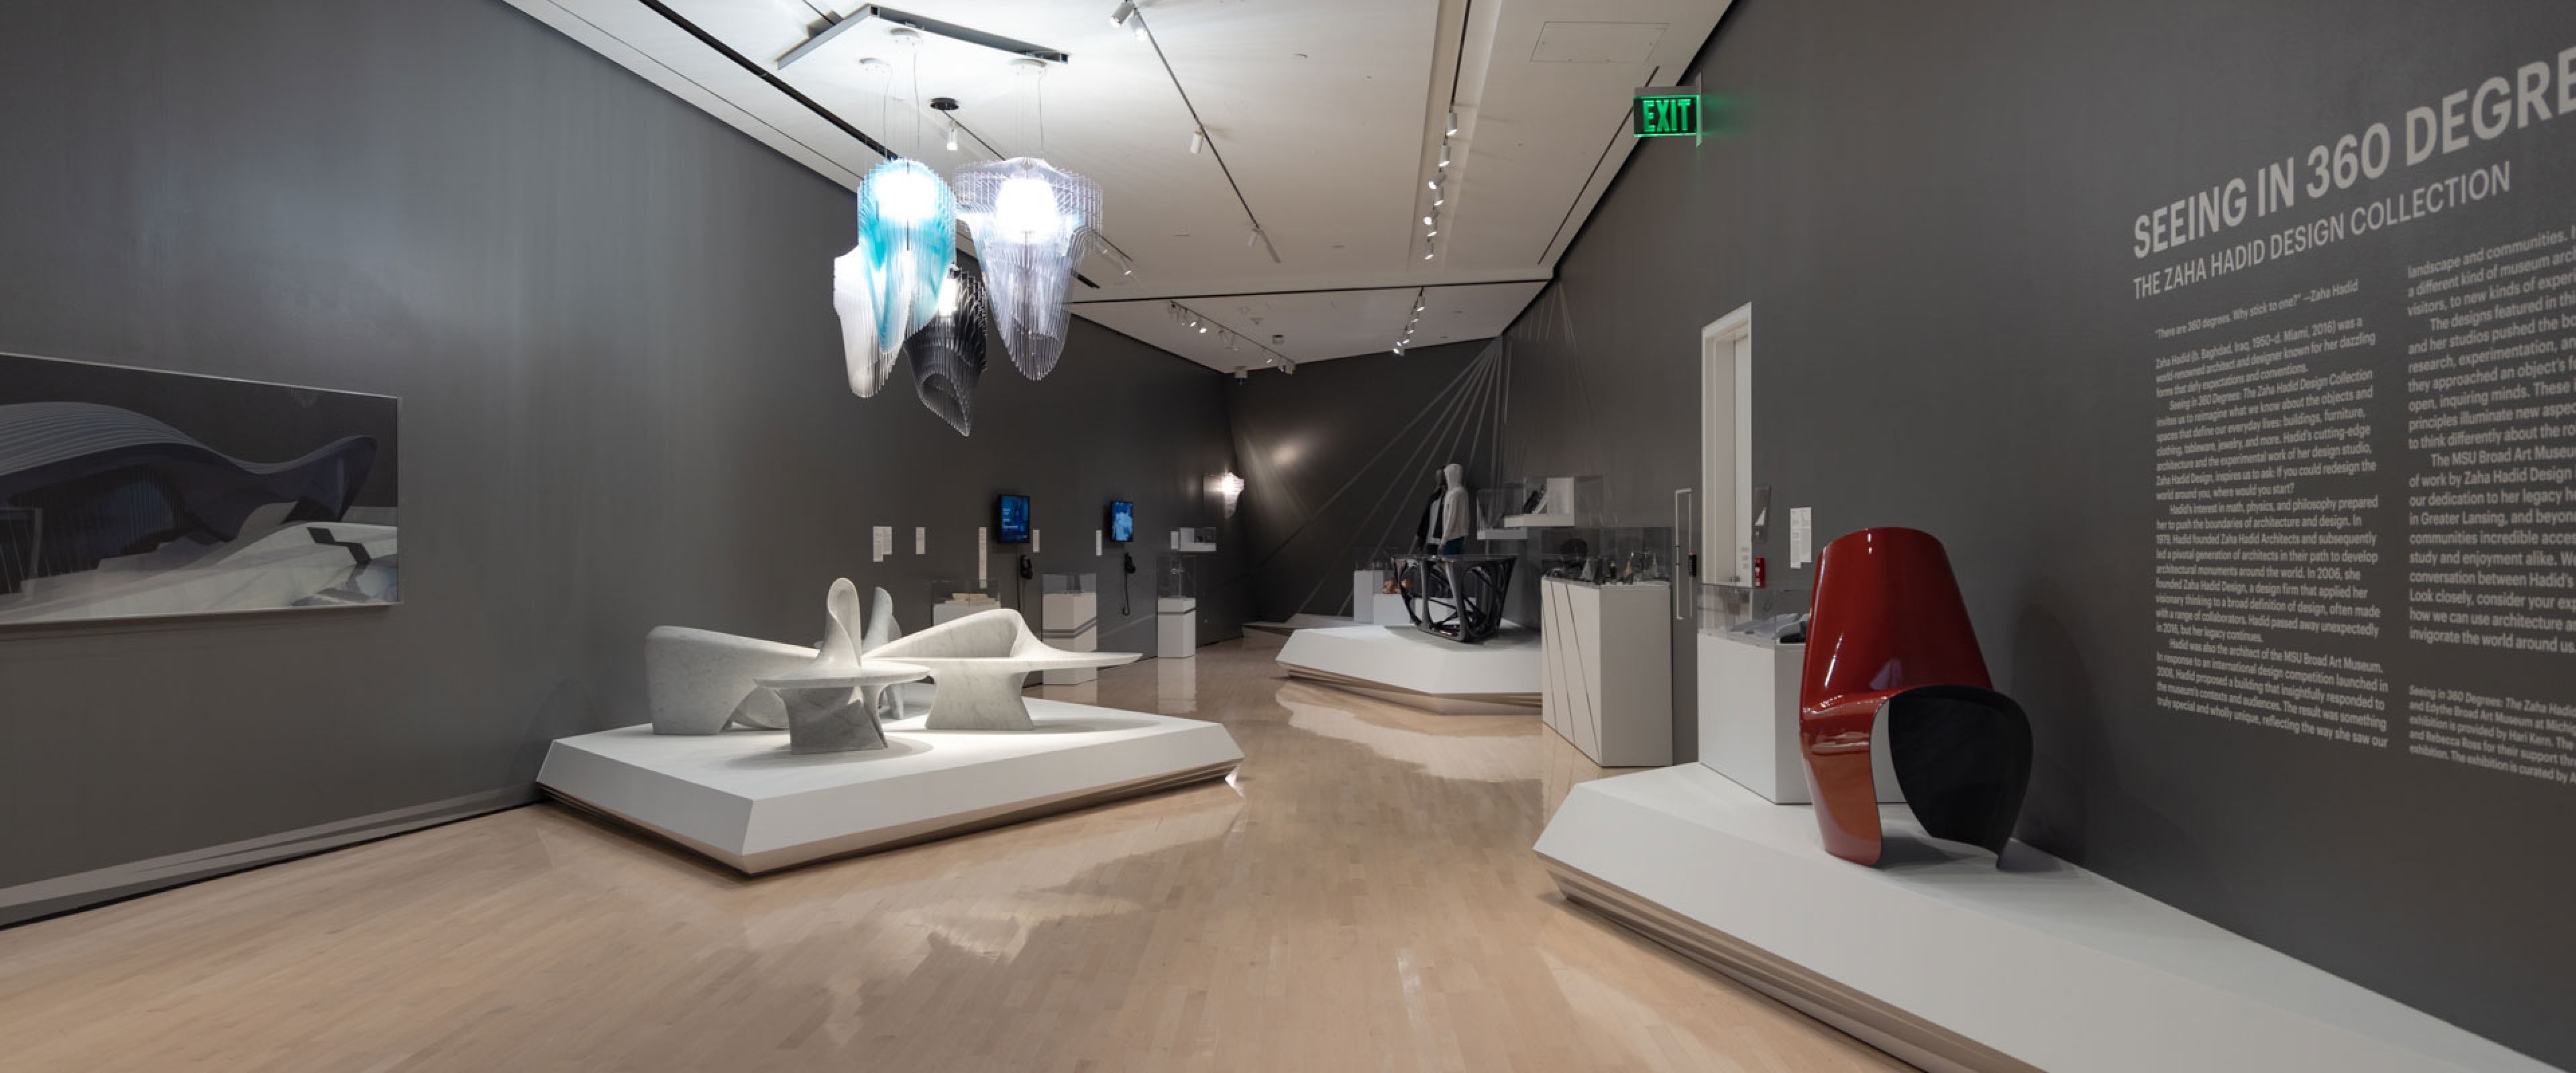 Gallery with designs by Zaha Hadid